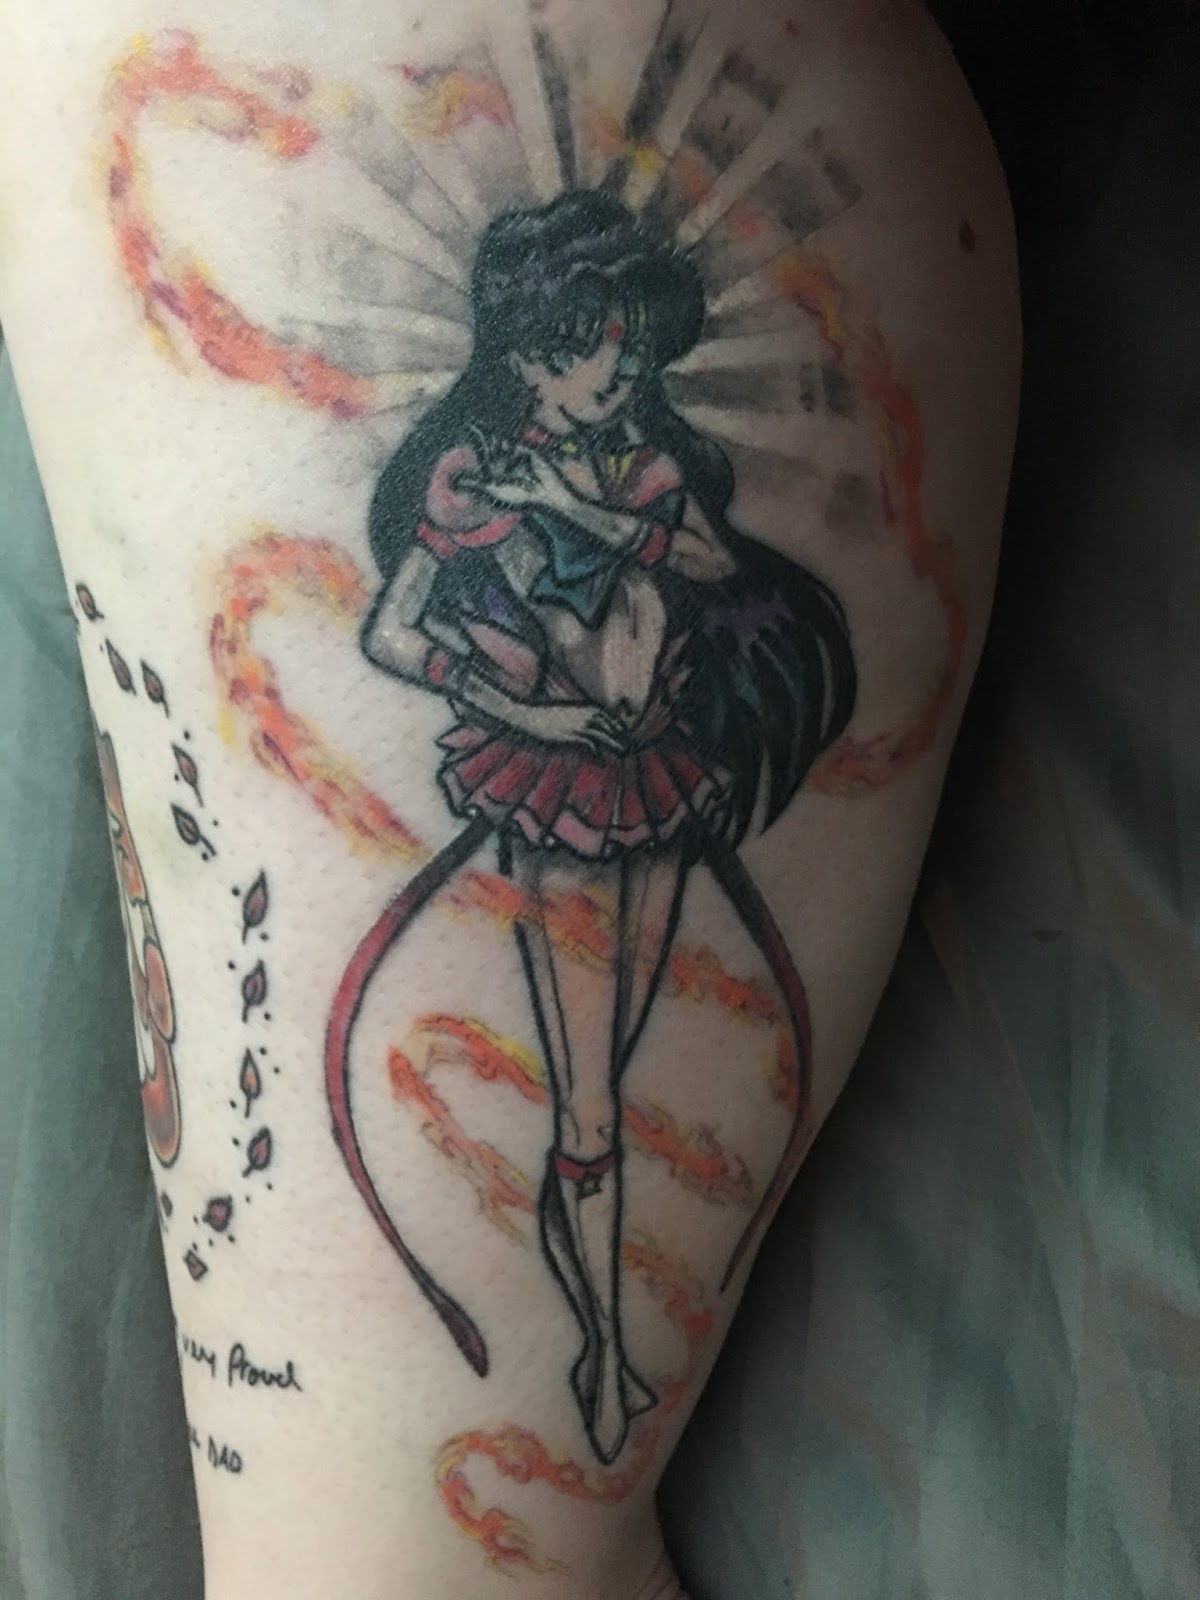  Hot Sailor Mars   A super hot version of Sailor Mars in my  vision  I got to excited about doing something different and I just   Instagram